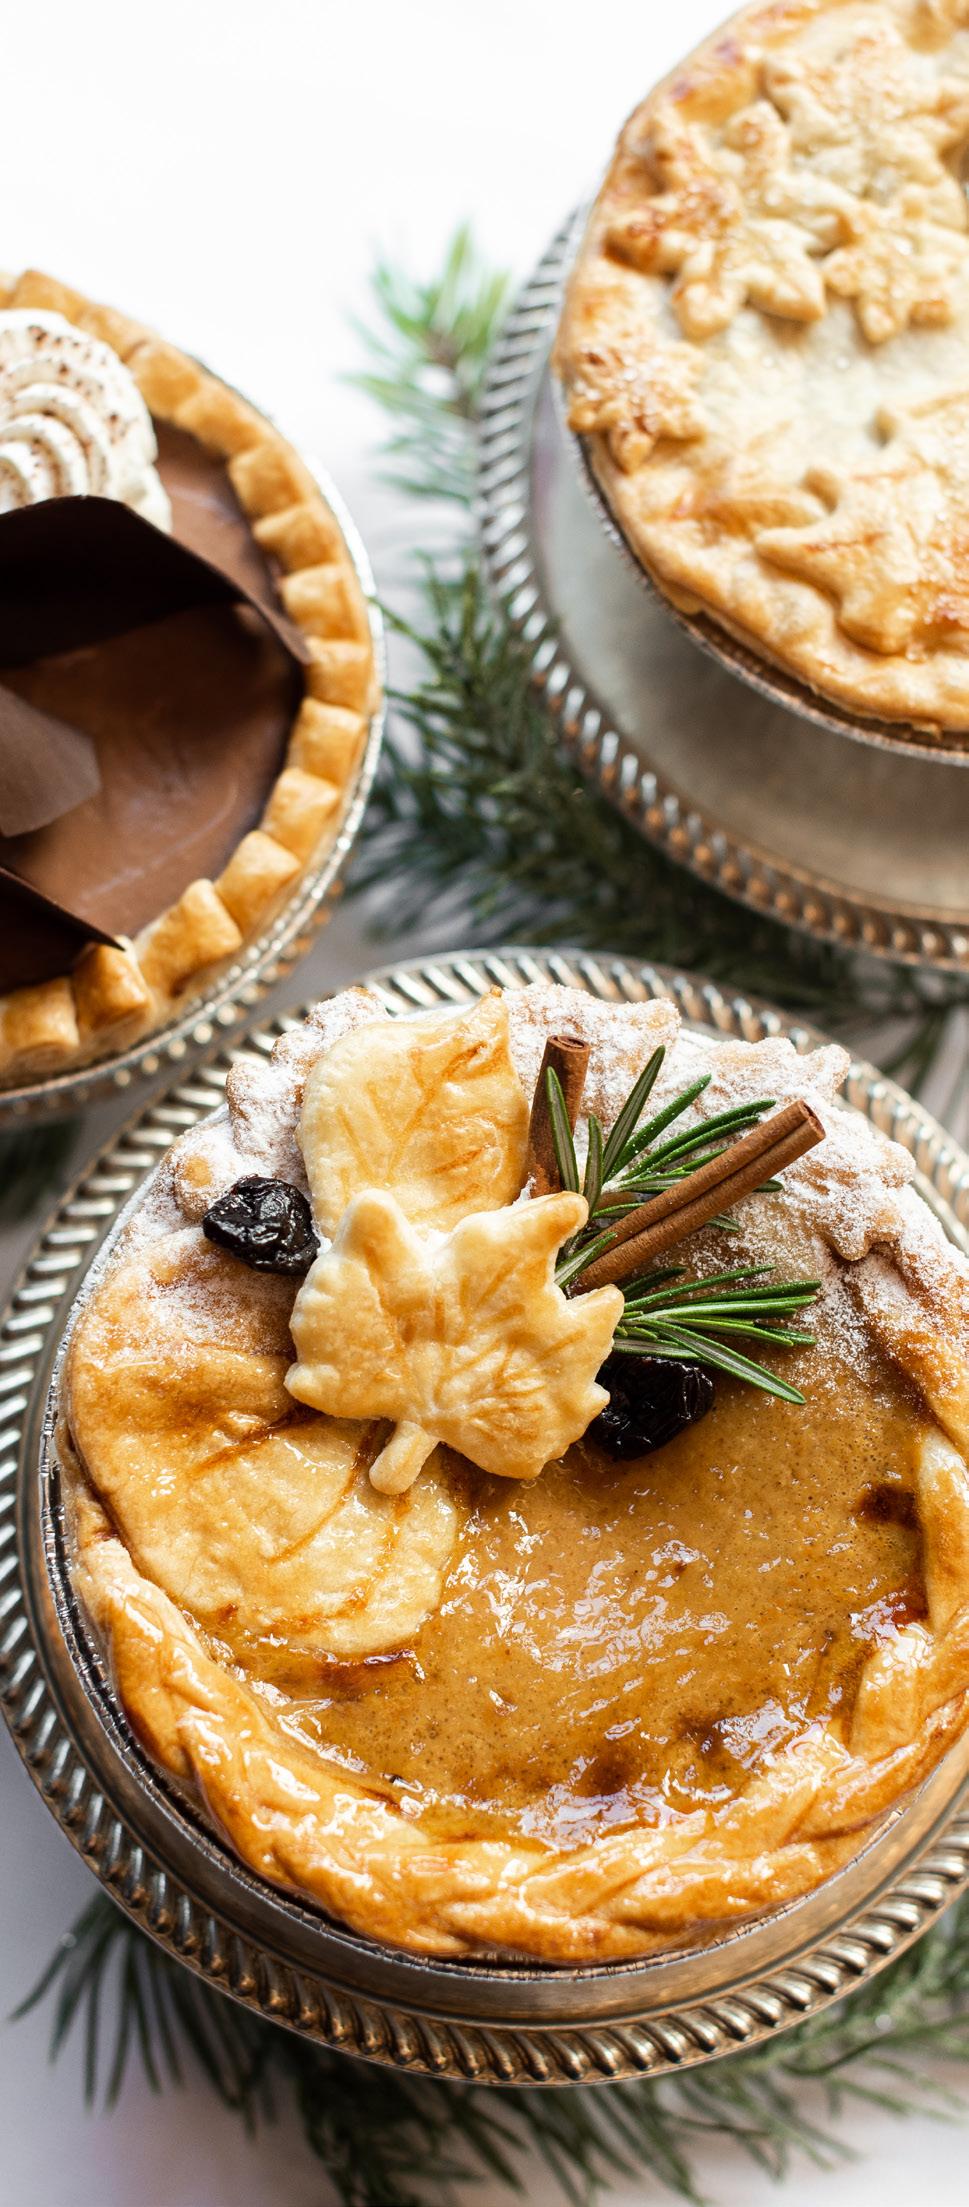 Thanksgiving November 16-22 Pie Flights To Go Make a lasting impression at your holiday gathering this season with decadent pie flights to go from our esteemed pastry team.